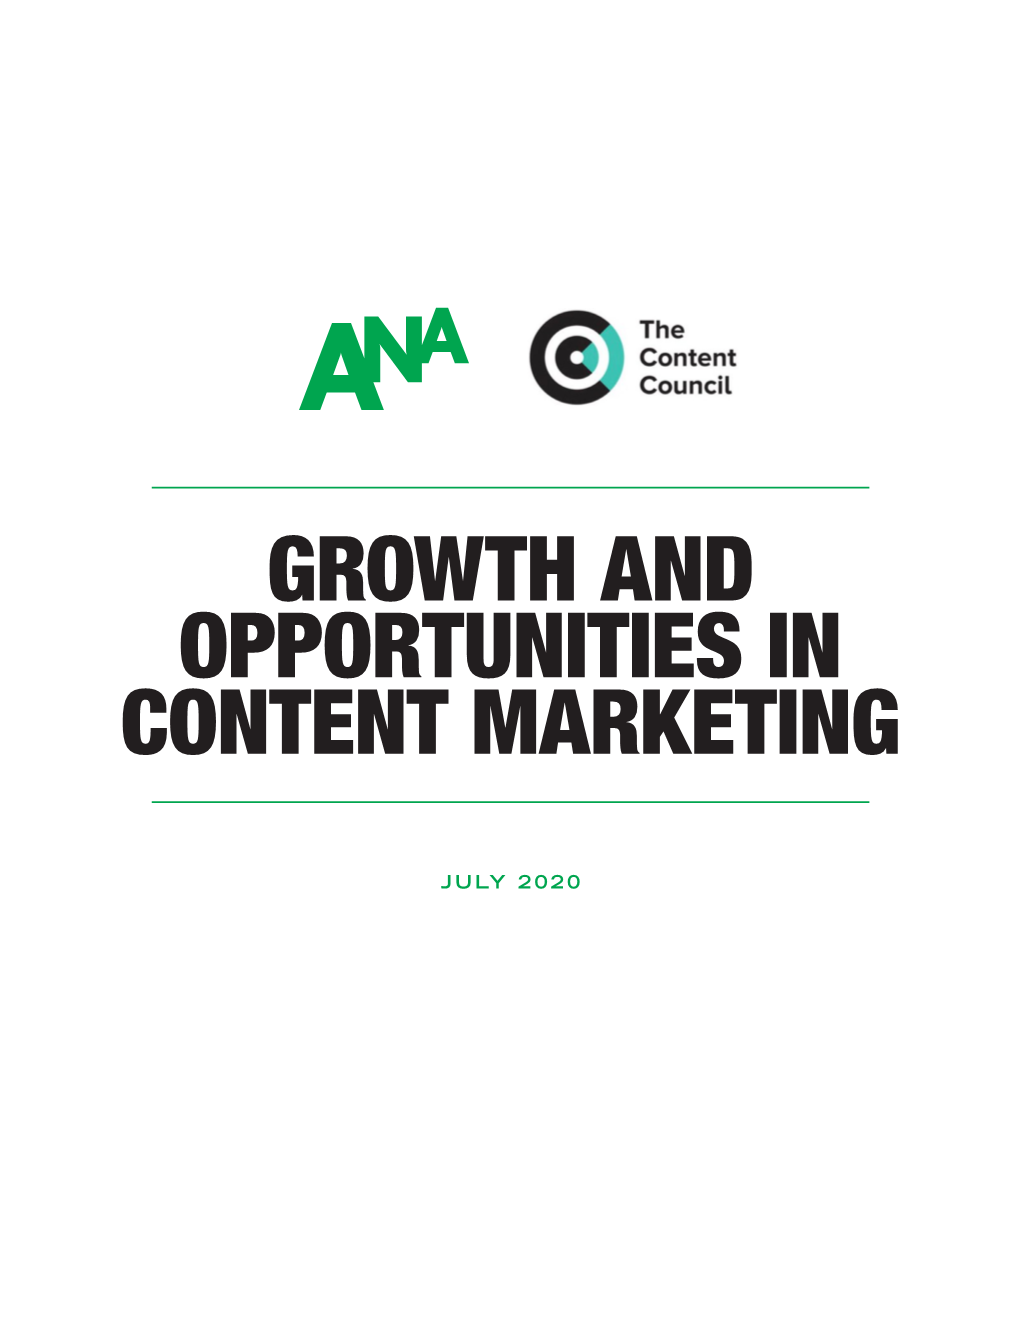 Growth and Opportunities in Content Marketing